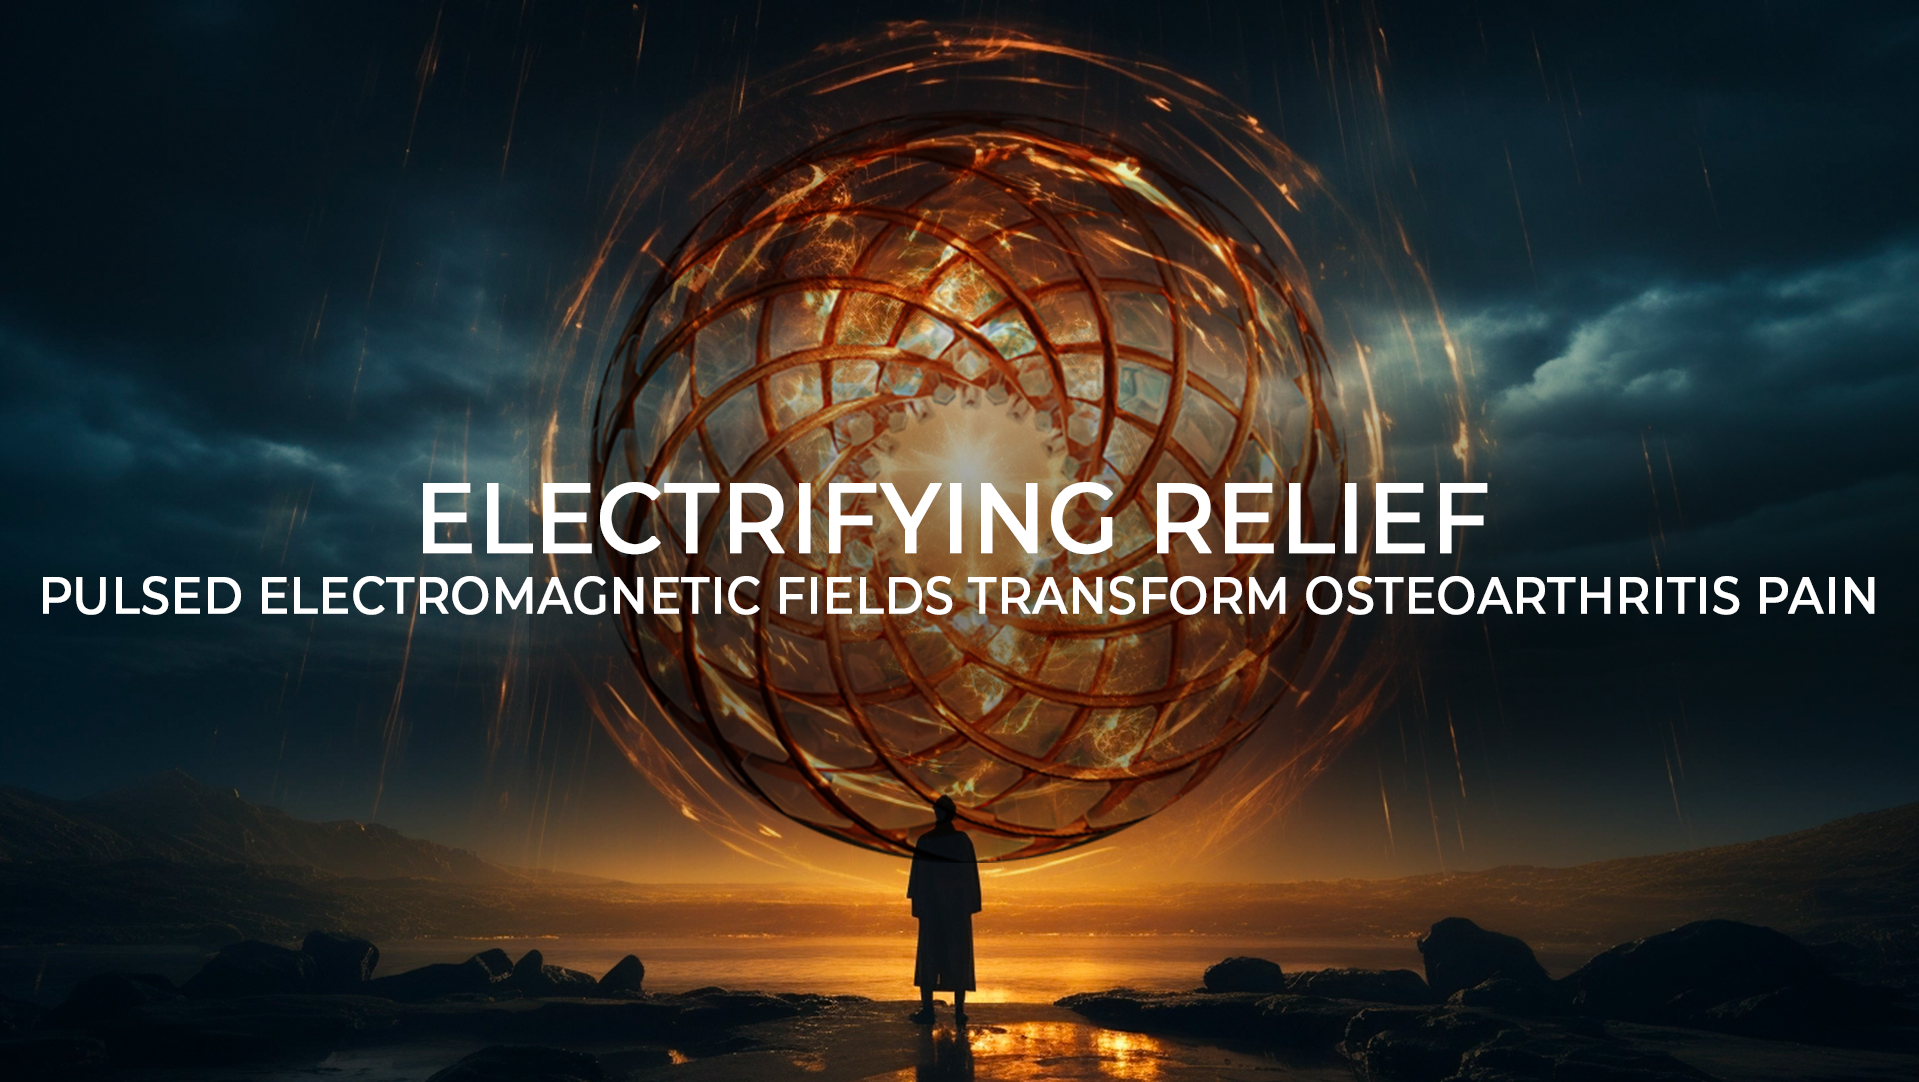 Electrifying Relief: Pulsed Electromagnetic Fields Transform Osteoarthritis Pain